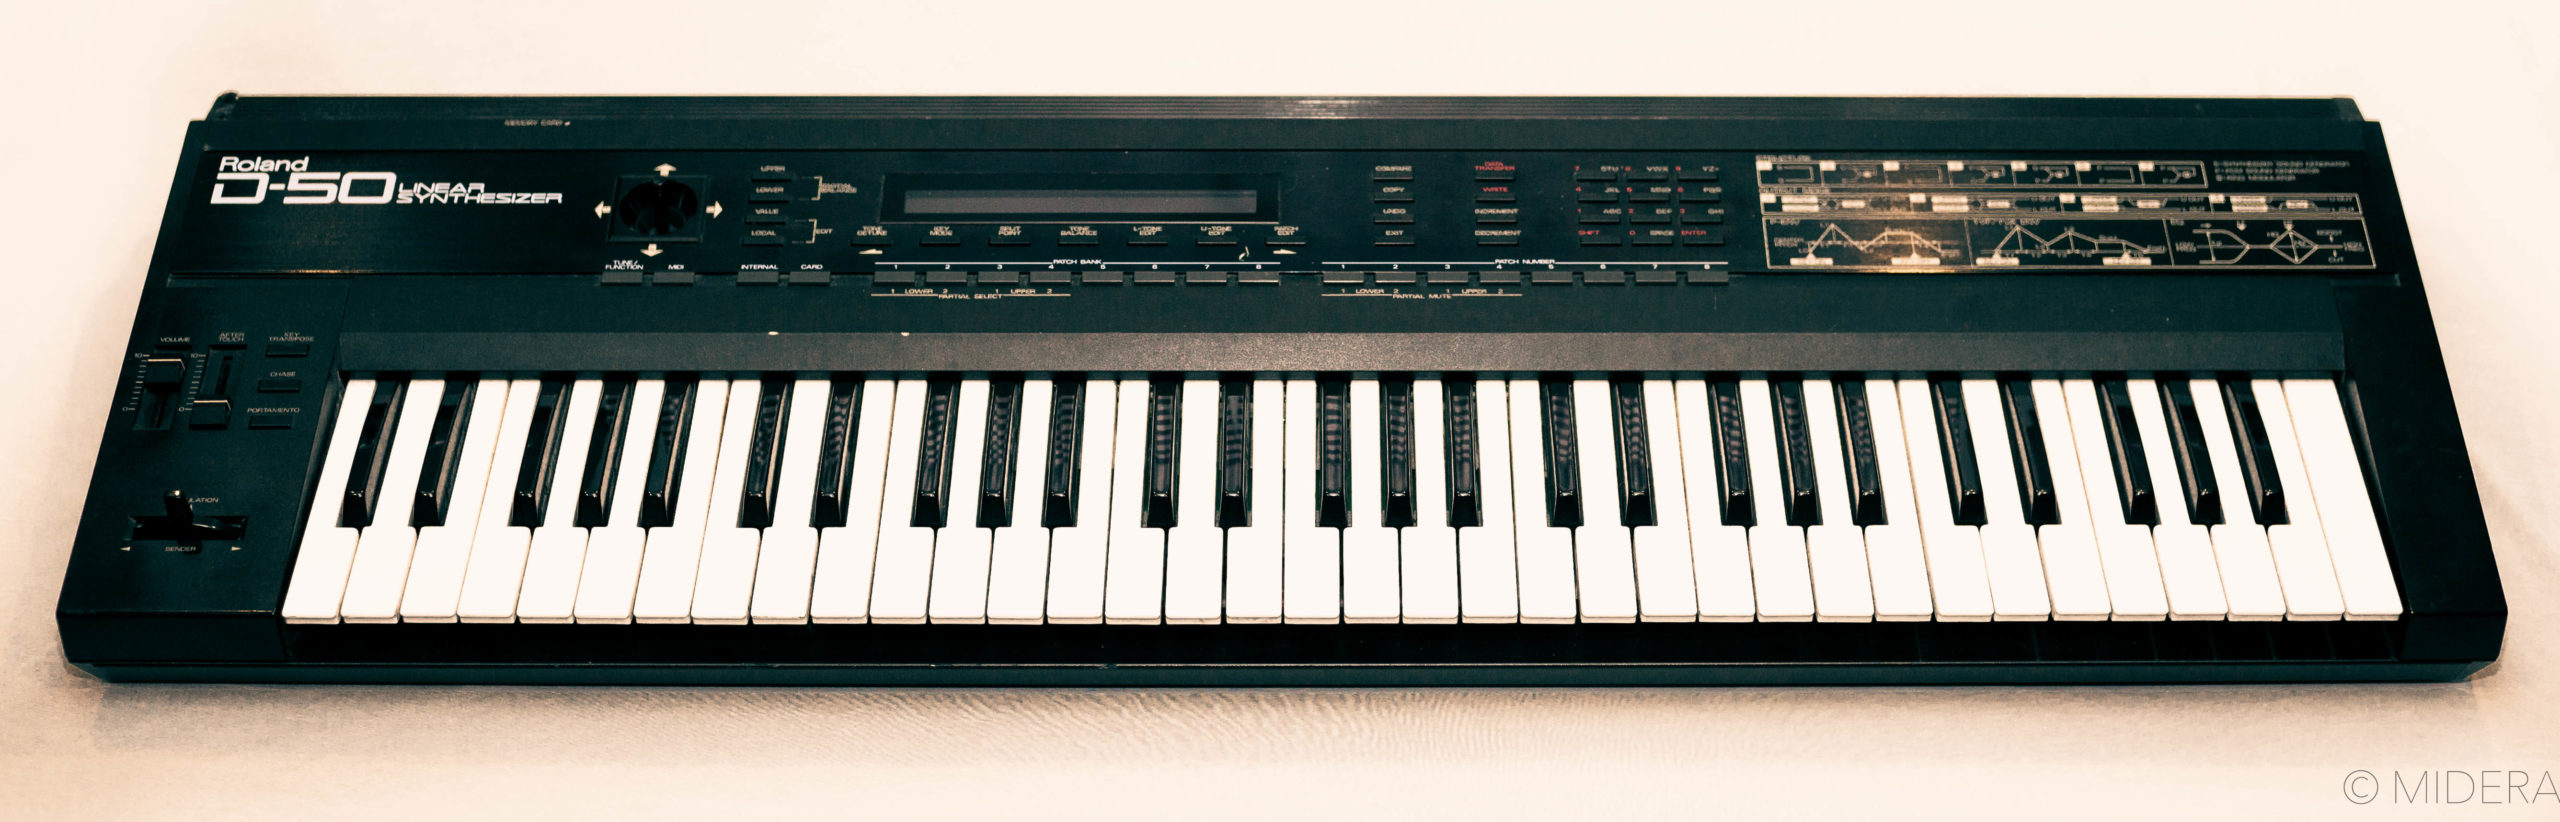 Front panel of the Roland D50